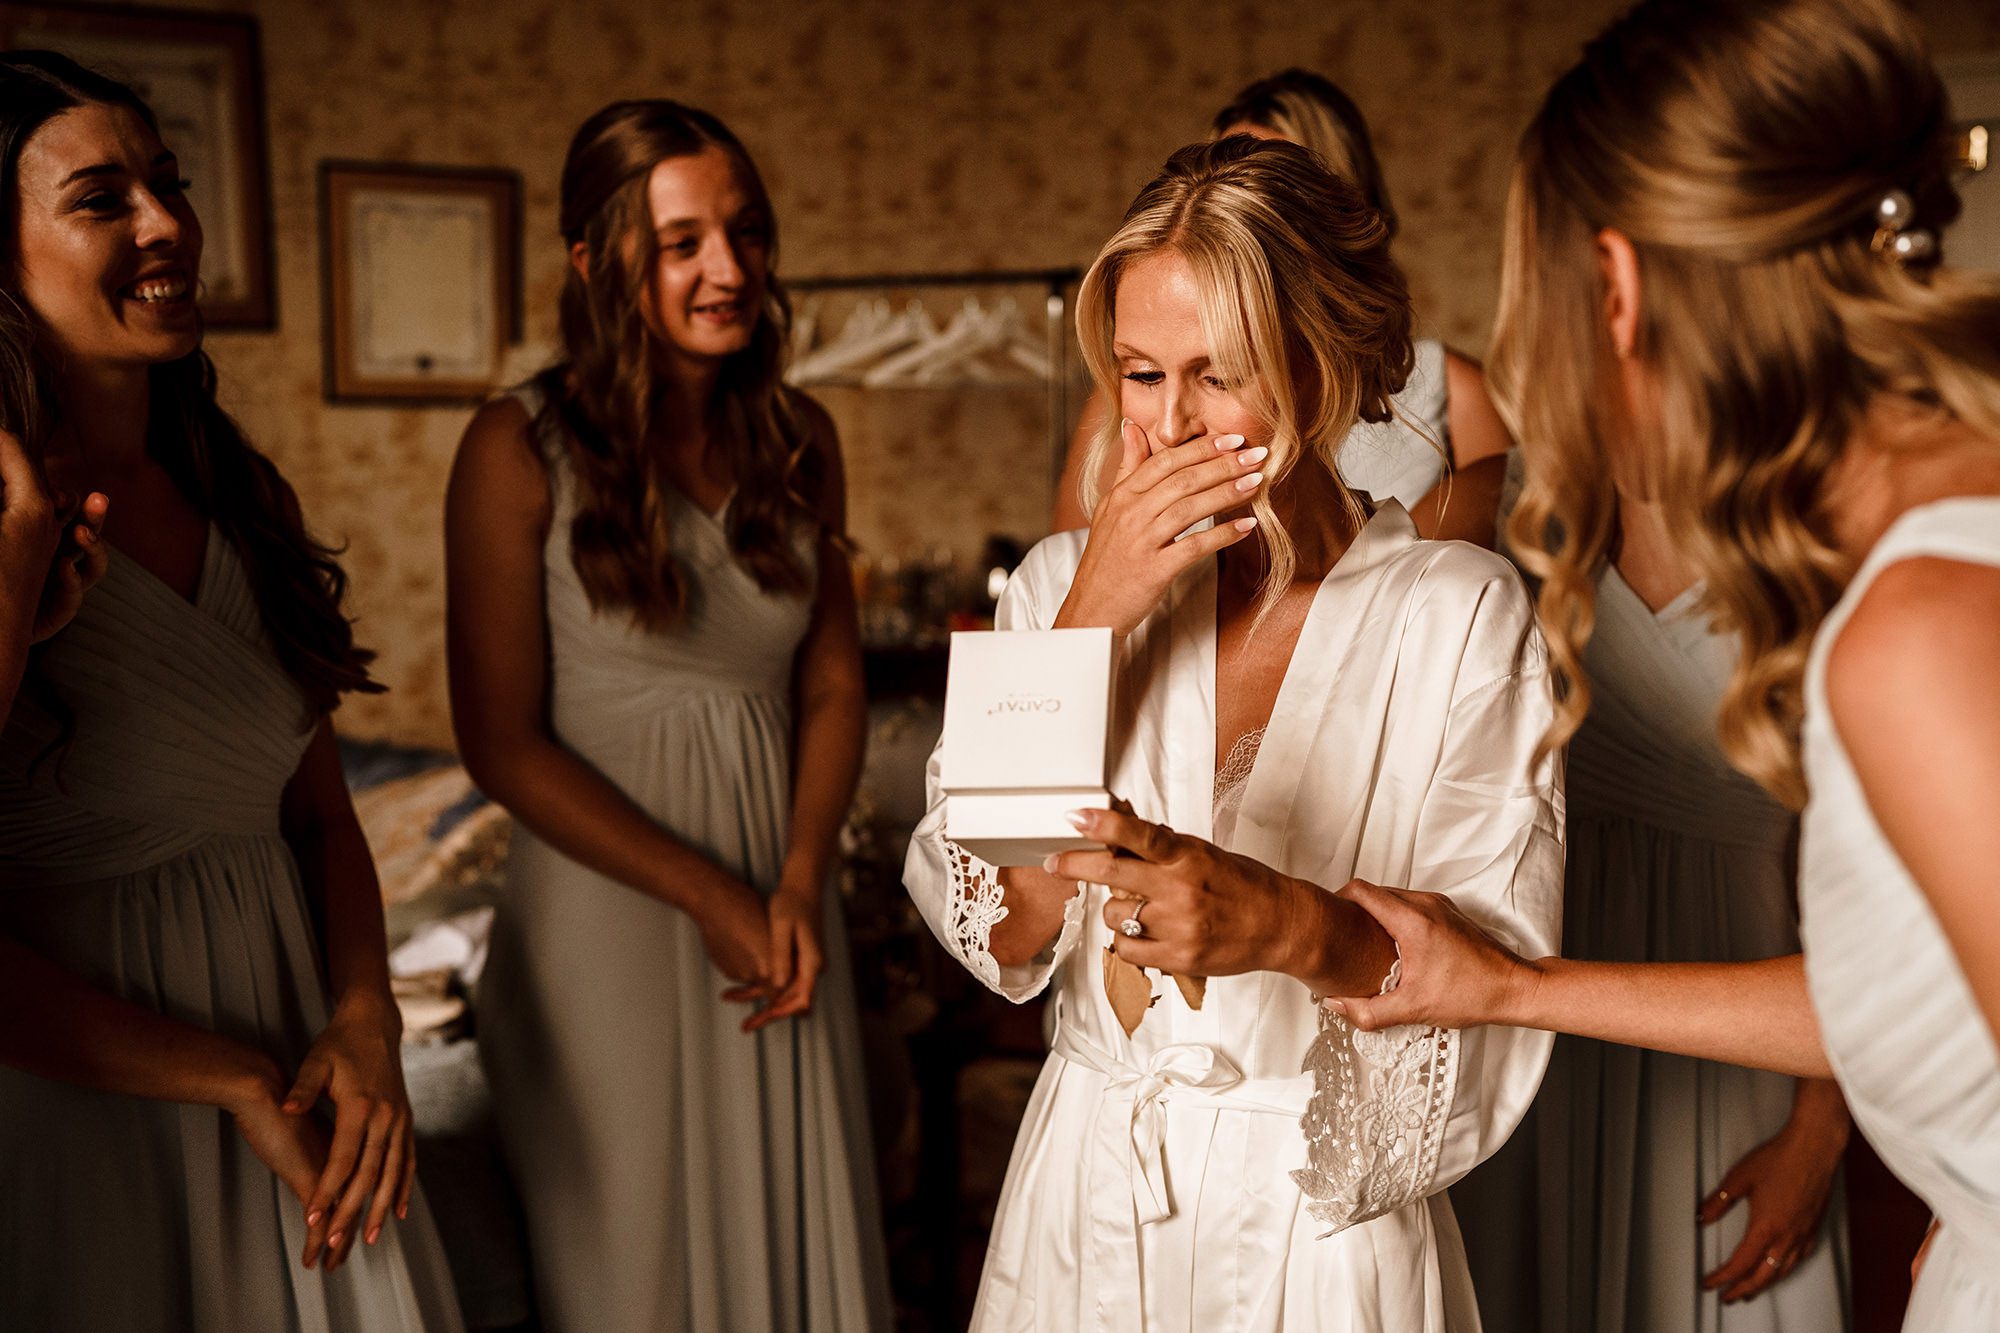 candid moment of bride opening up her wedding gift